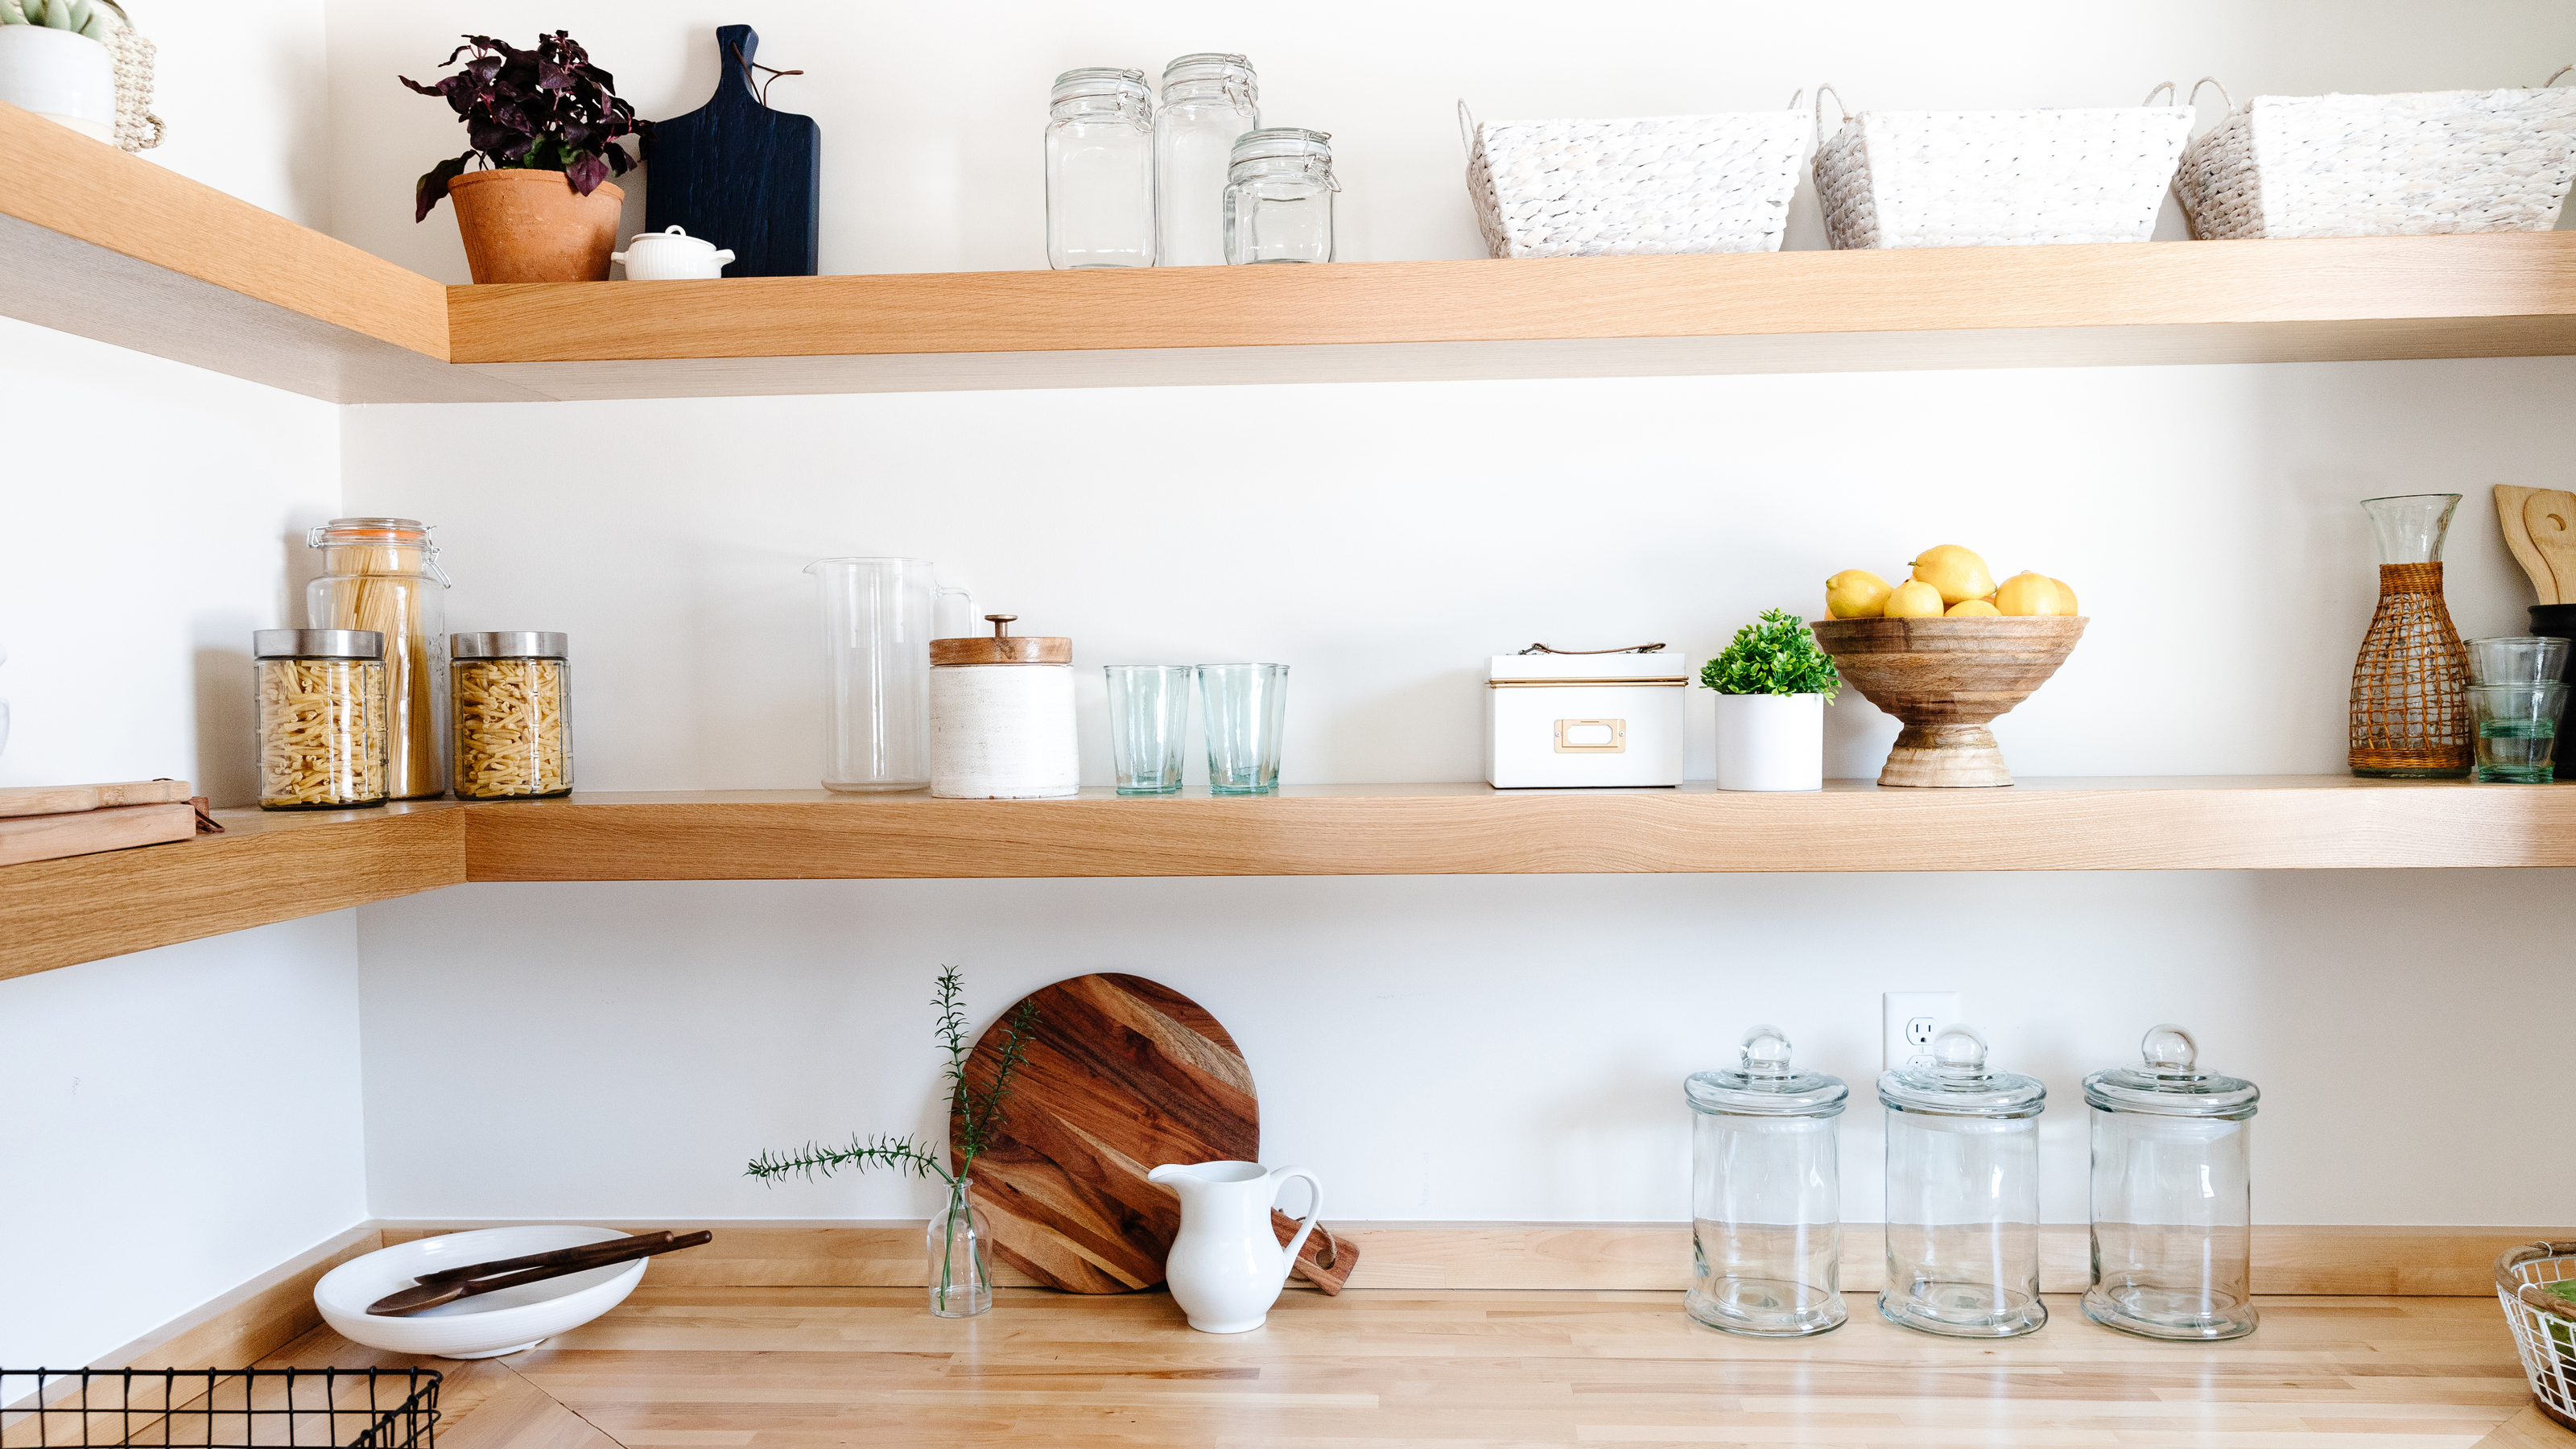 25 kitchen storage ideas to organize your home's hotspot   Real Homes